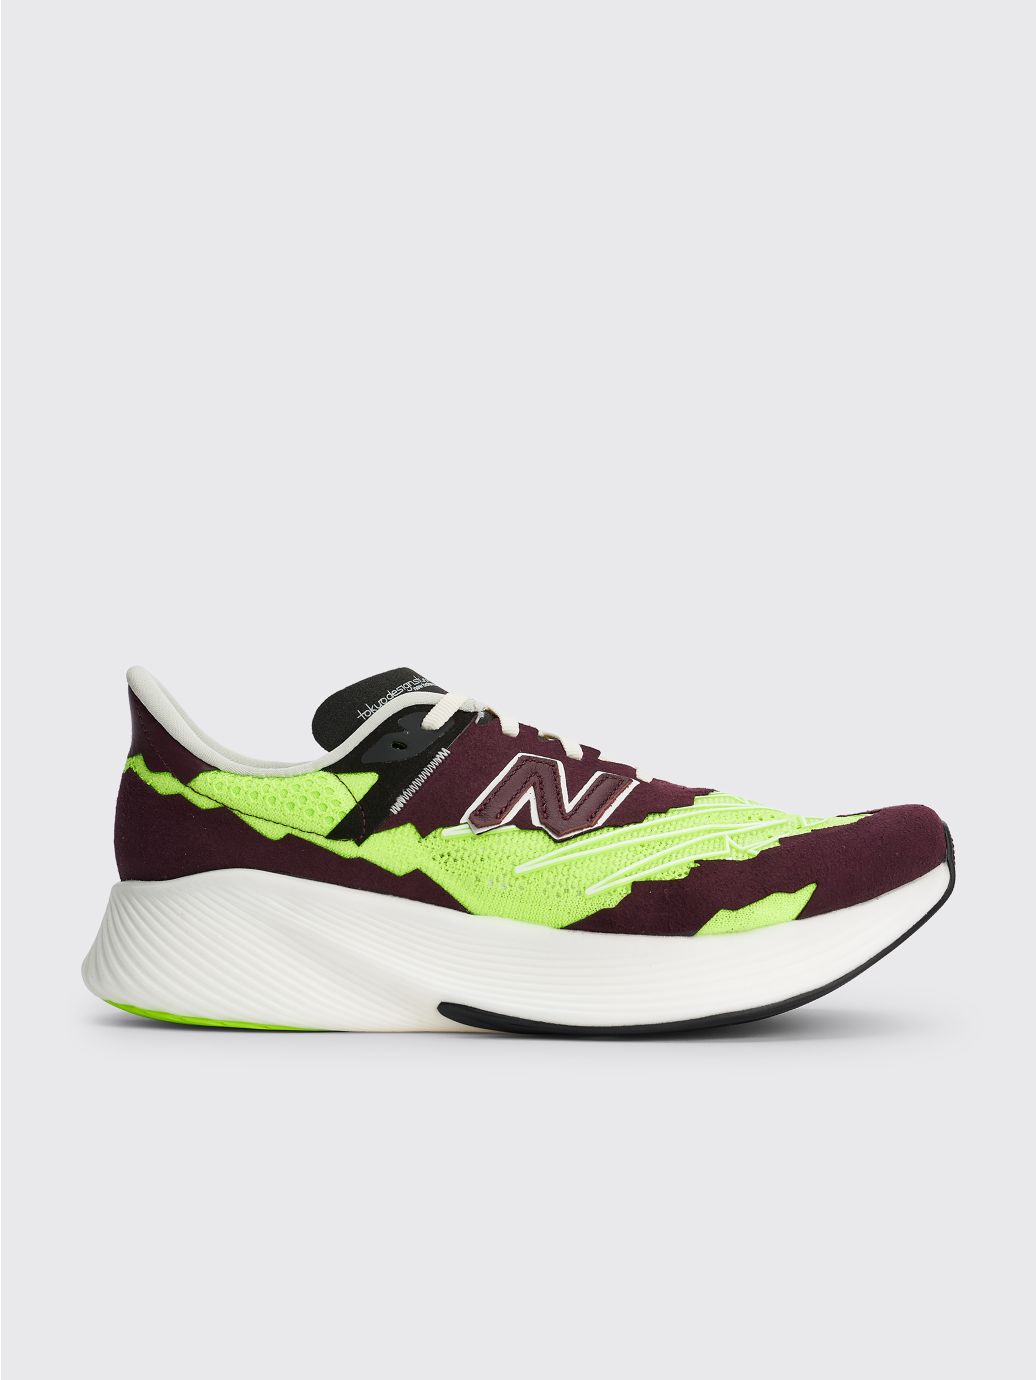 undefined | New Balance x Stone Island TDS FuelCell RC Elite v2